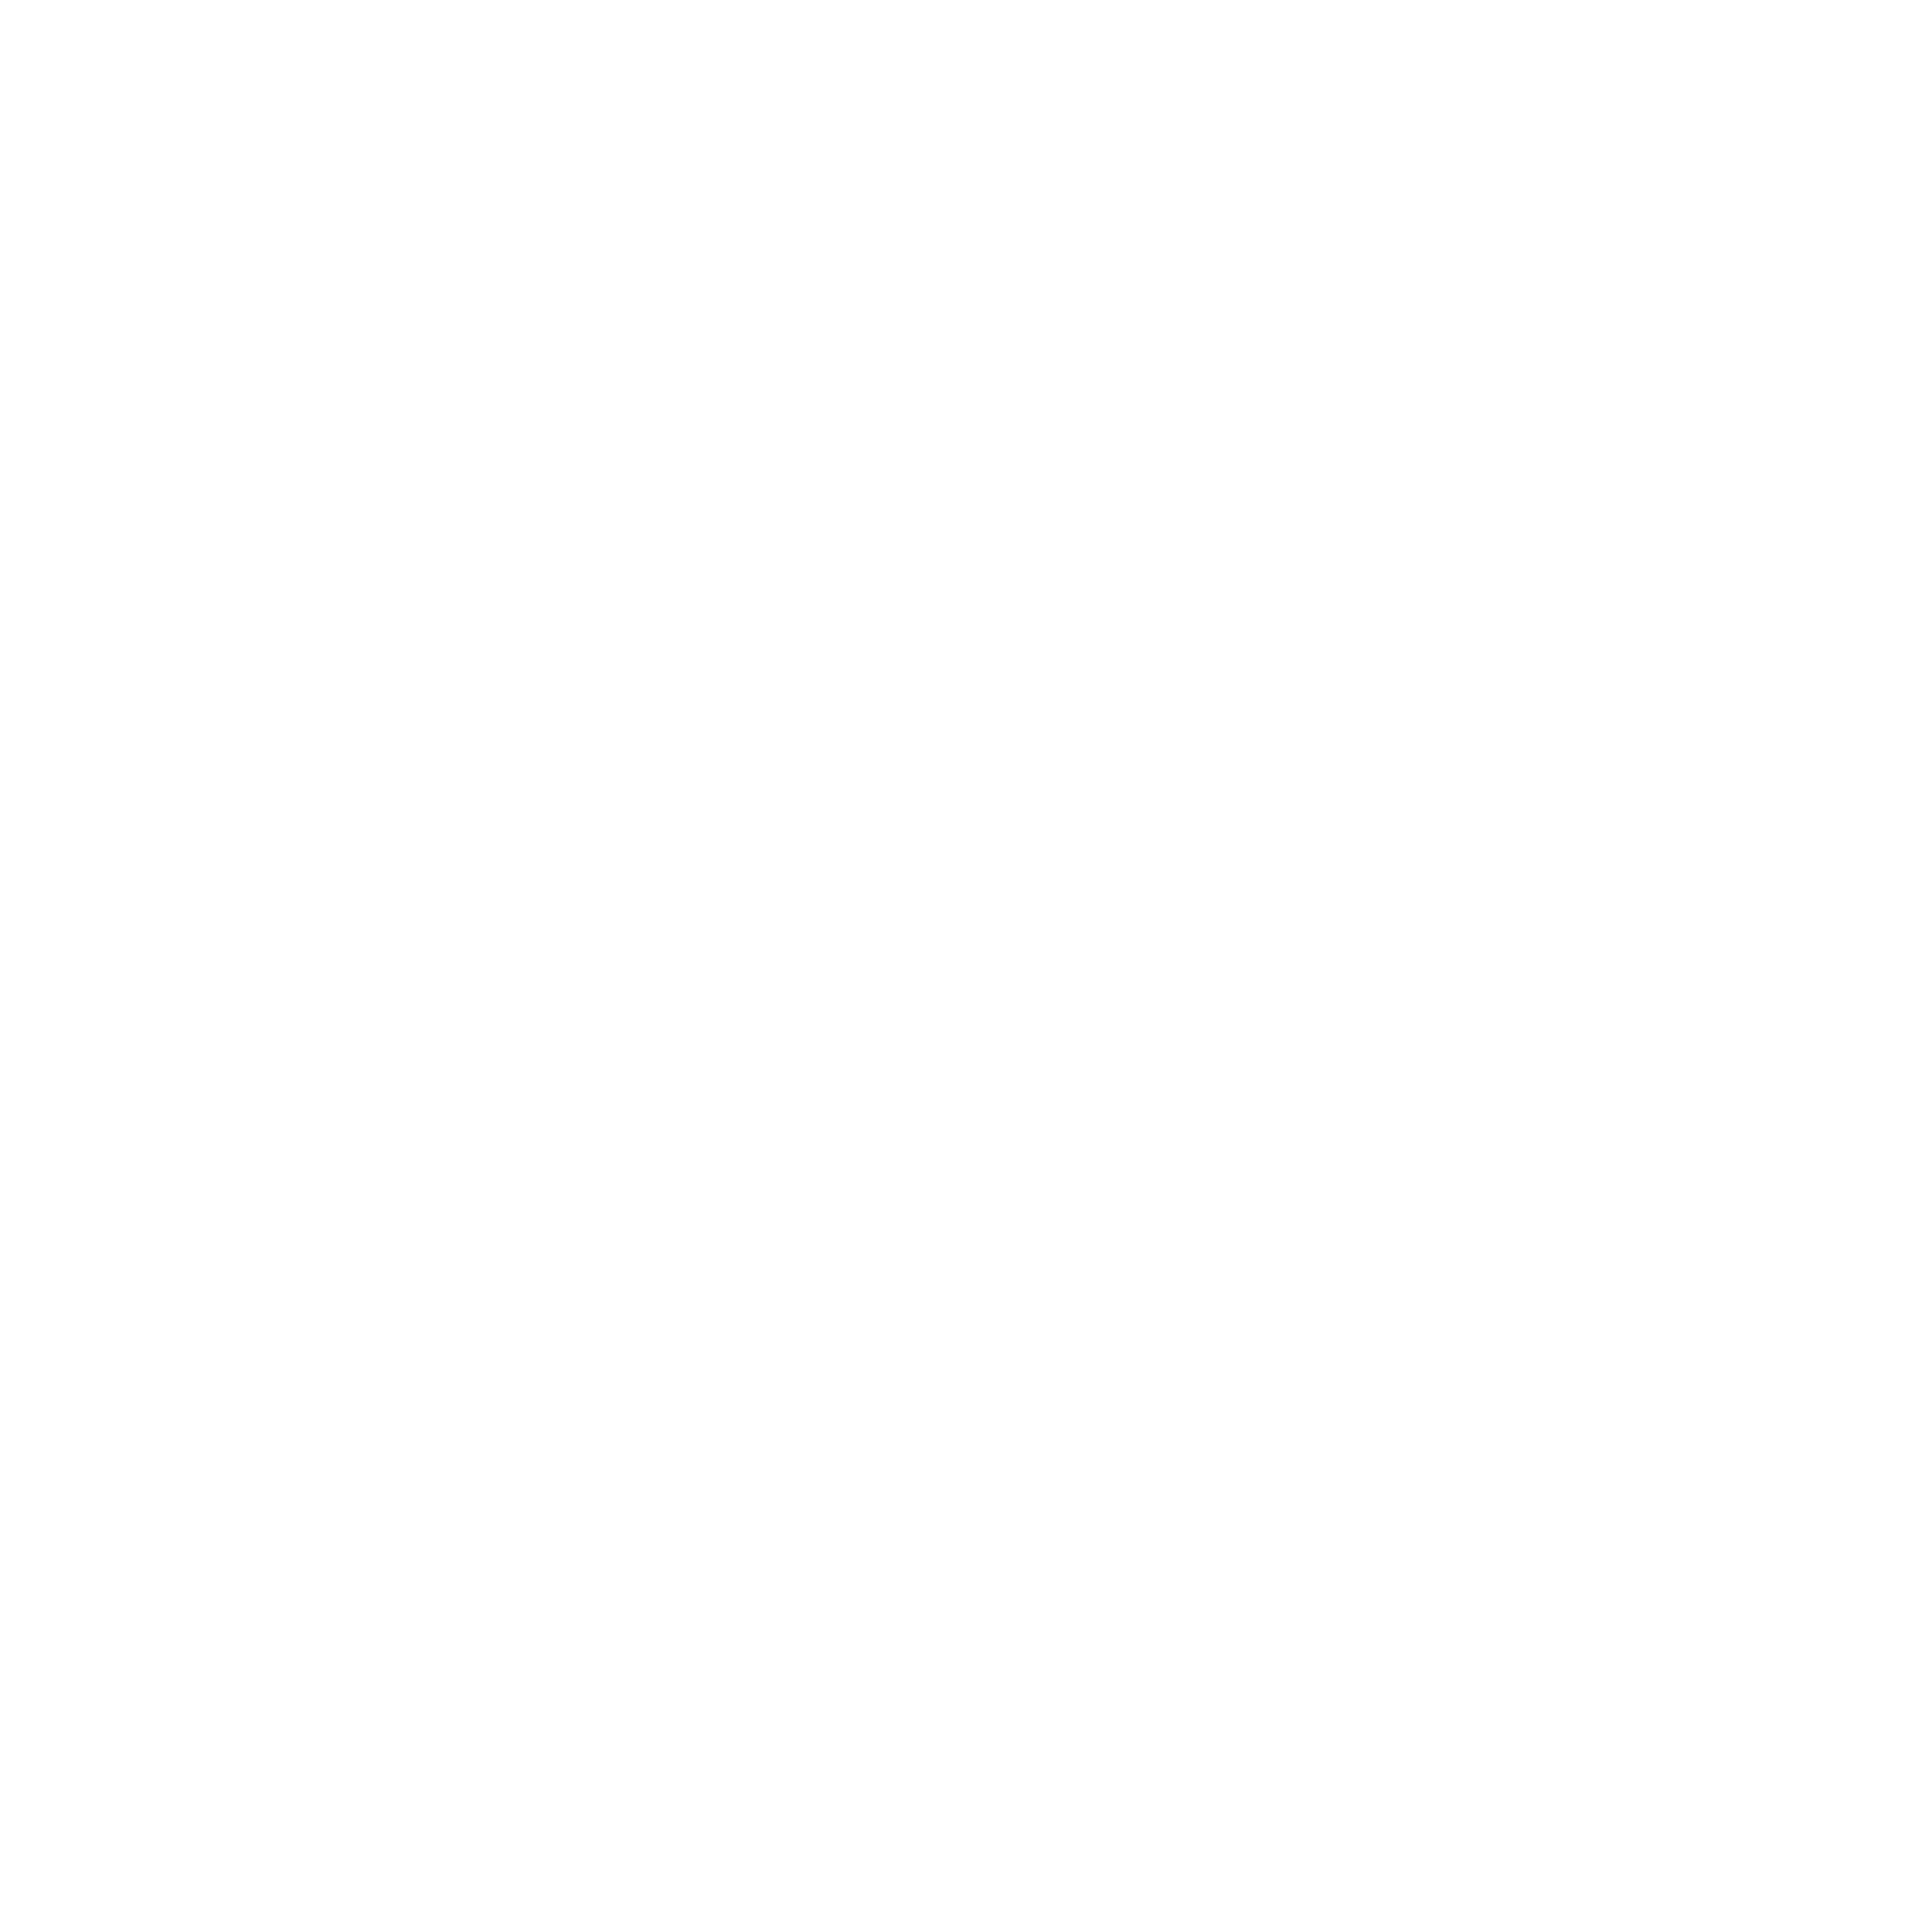 Dether Cryptocurrency icon